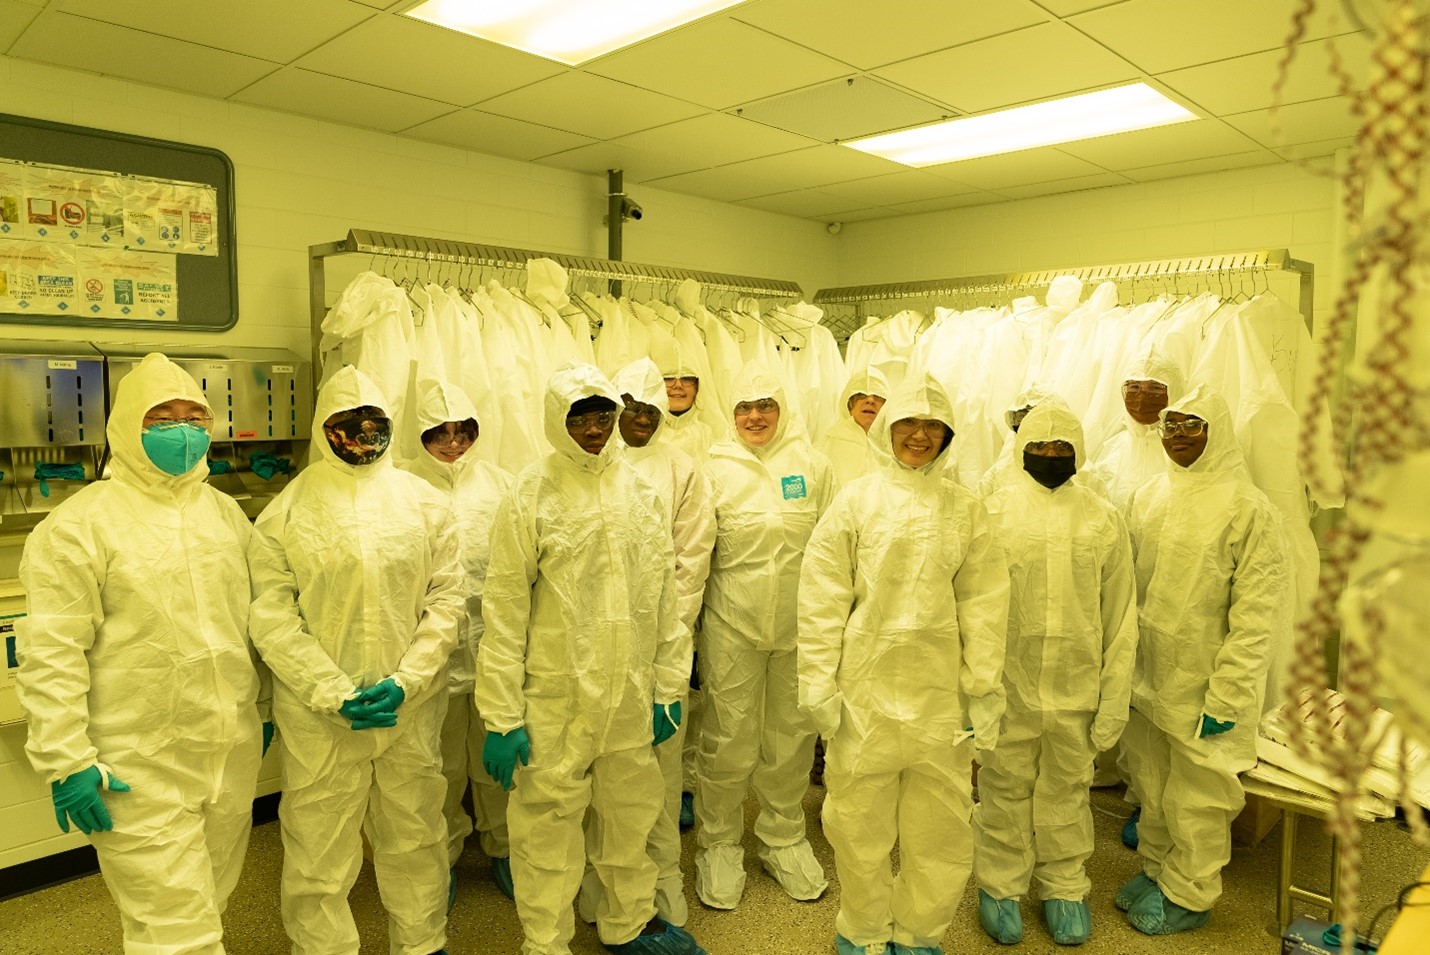 MRL staff scientist Dr. Xiaoli Wang and a group of Franklin STEAM Academy students and leaders suited up before going on a tour of the MRL cleanroom in February (2023).